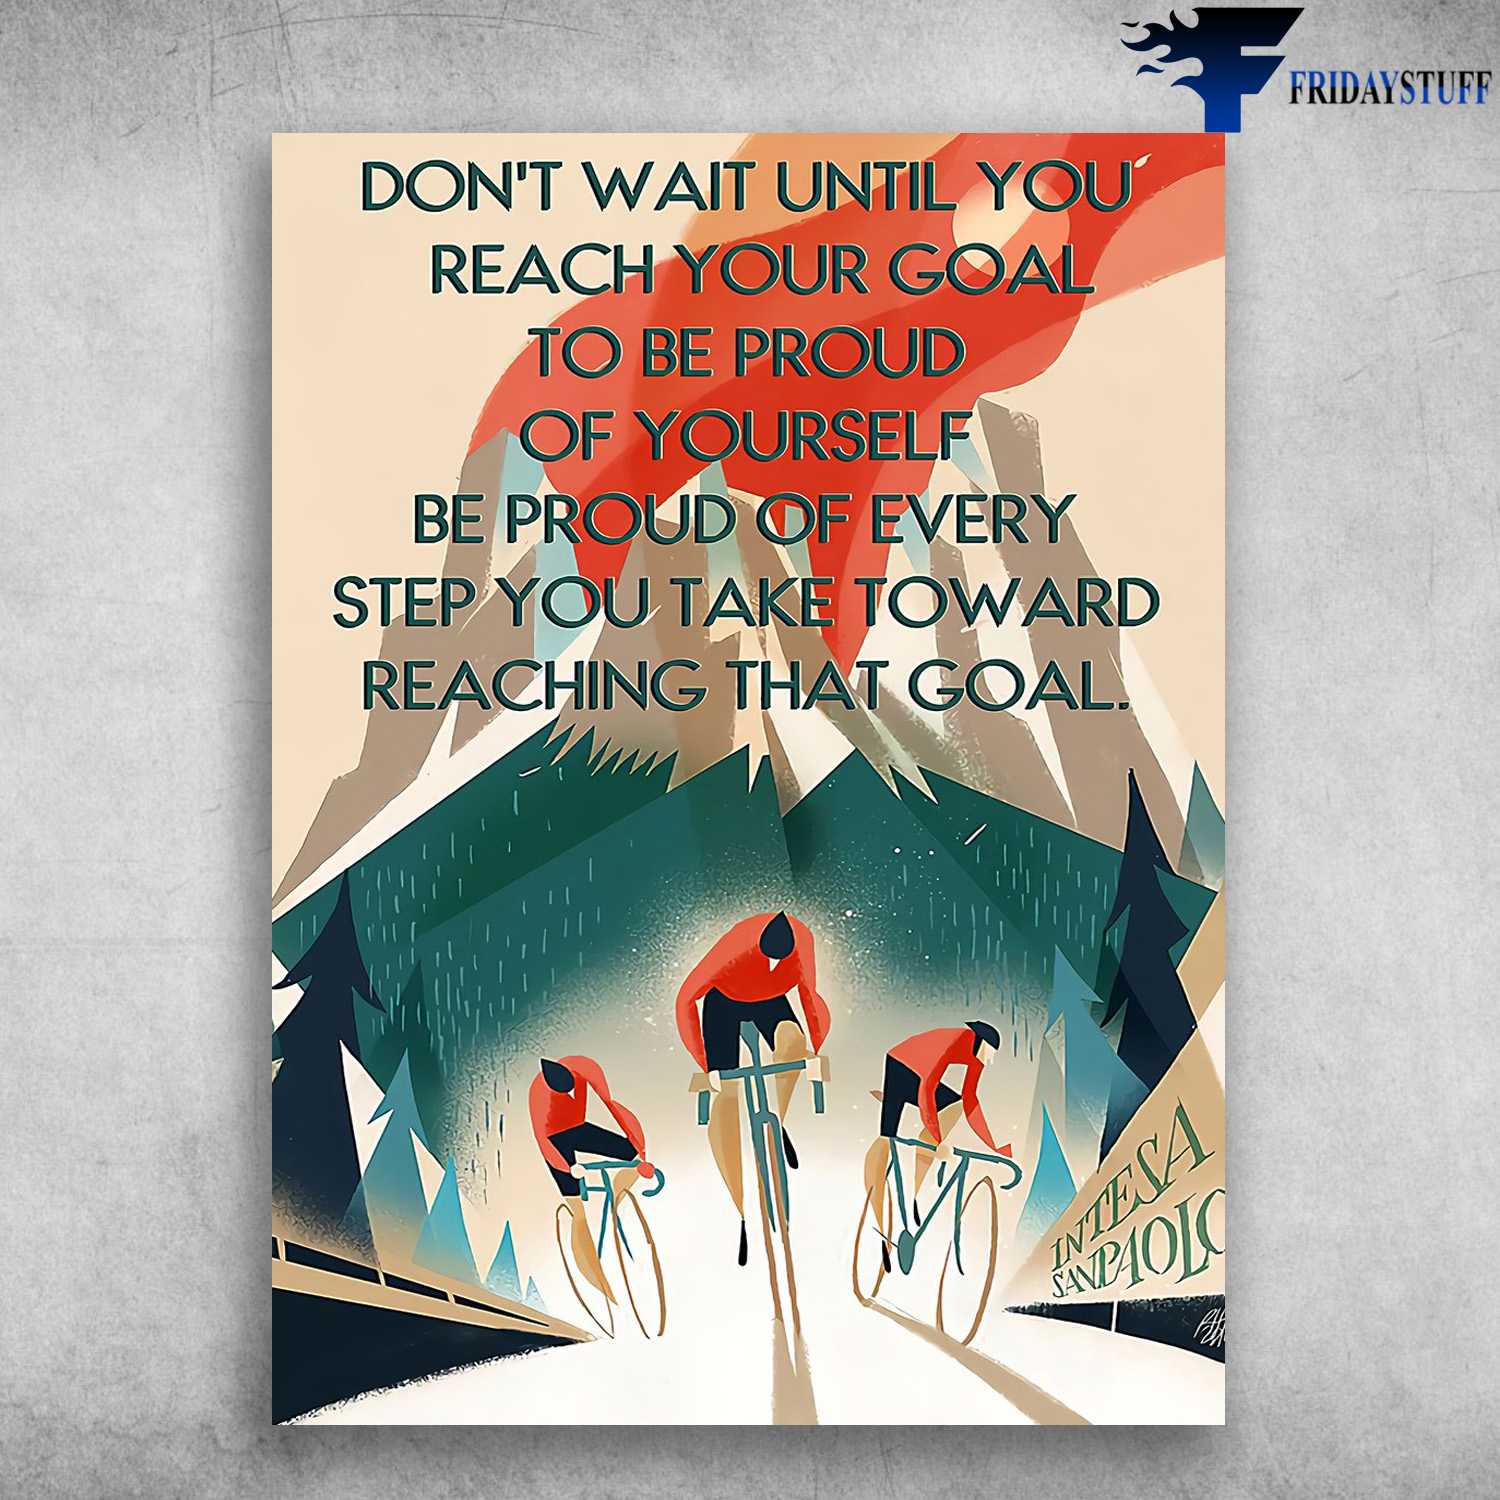 Cycling Poster, Moutain Biking - Don't Wait Until You Reach Your Goal, To Be Proud Of Yourself, Be Proud Of Every Step You Take Toward, Reaching That Goal